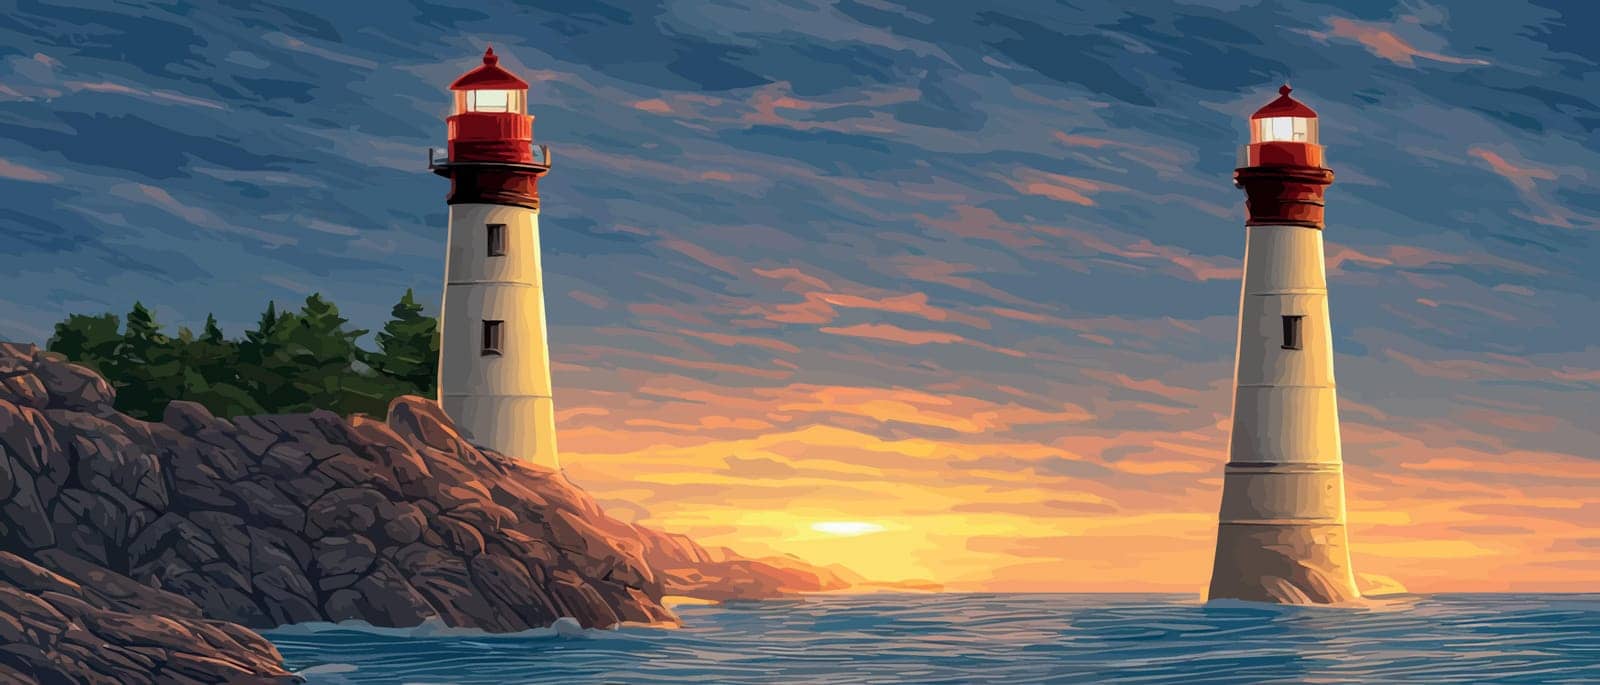 Tower is red and white lighthouse decorated with sea view with mountains as a backdrop at sunset with clouds, waves in the ocean. Design from art, paper and digital crafts. Vector illustration